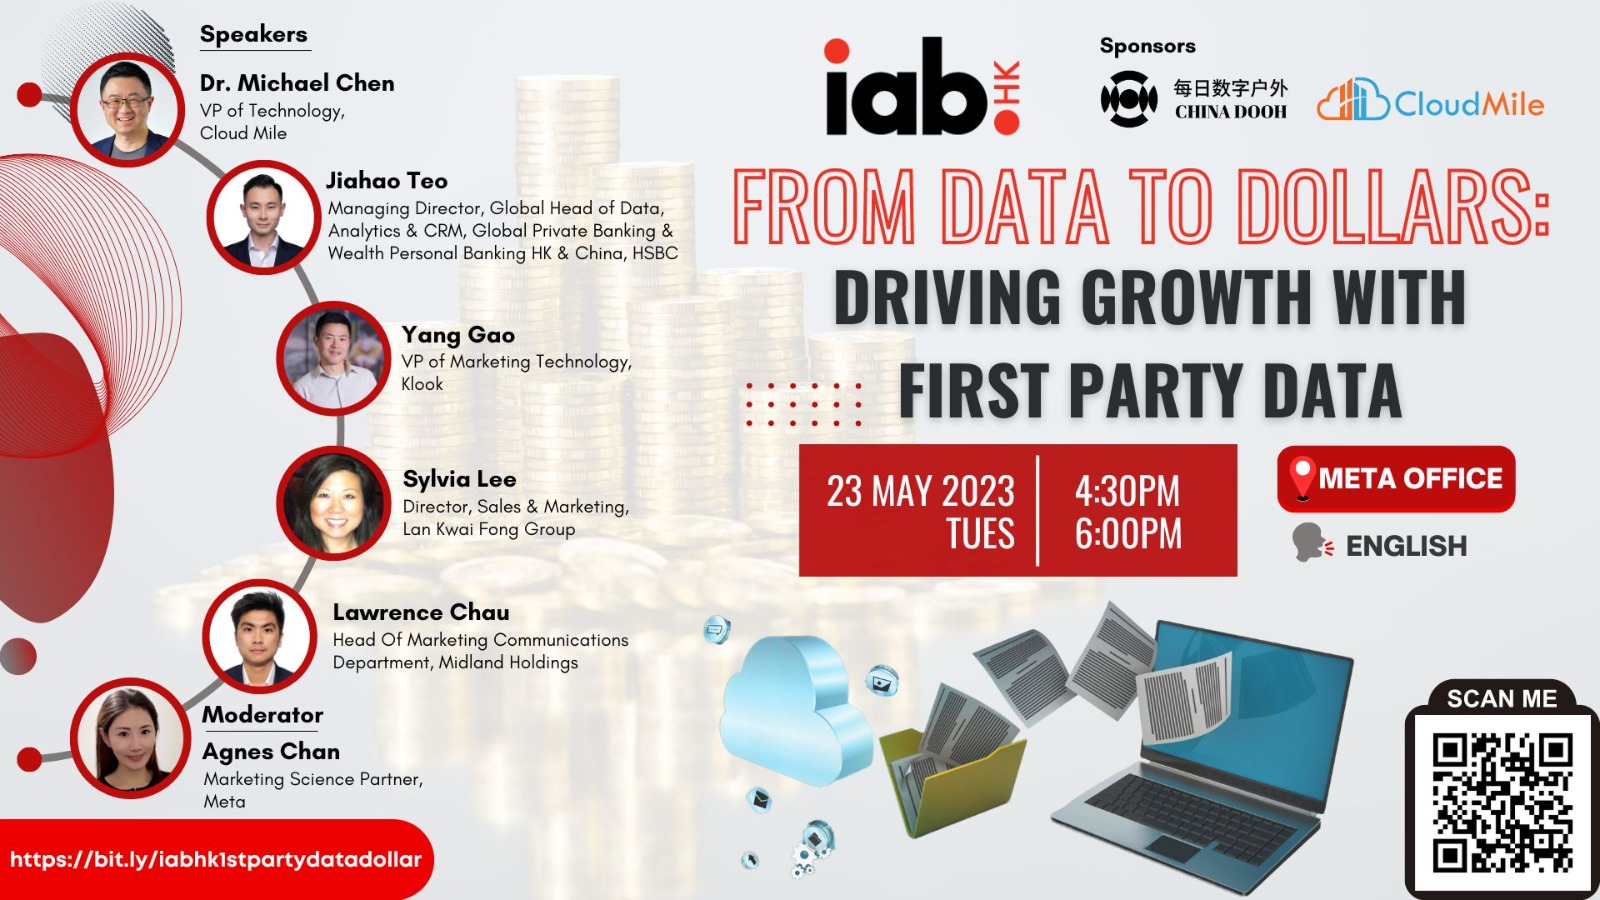 From Data to Dollars: Driving Growth with First Party Data